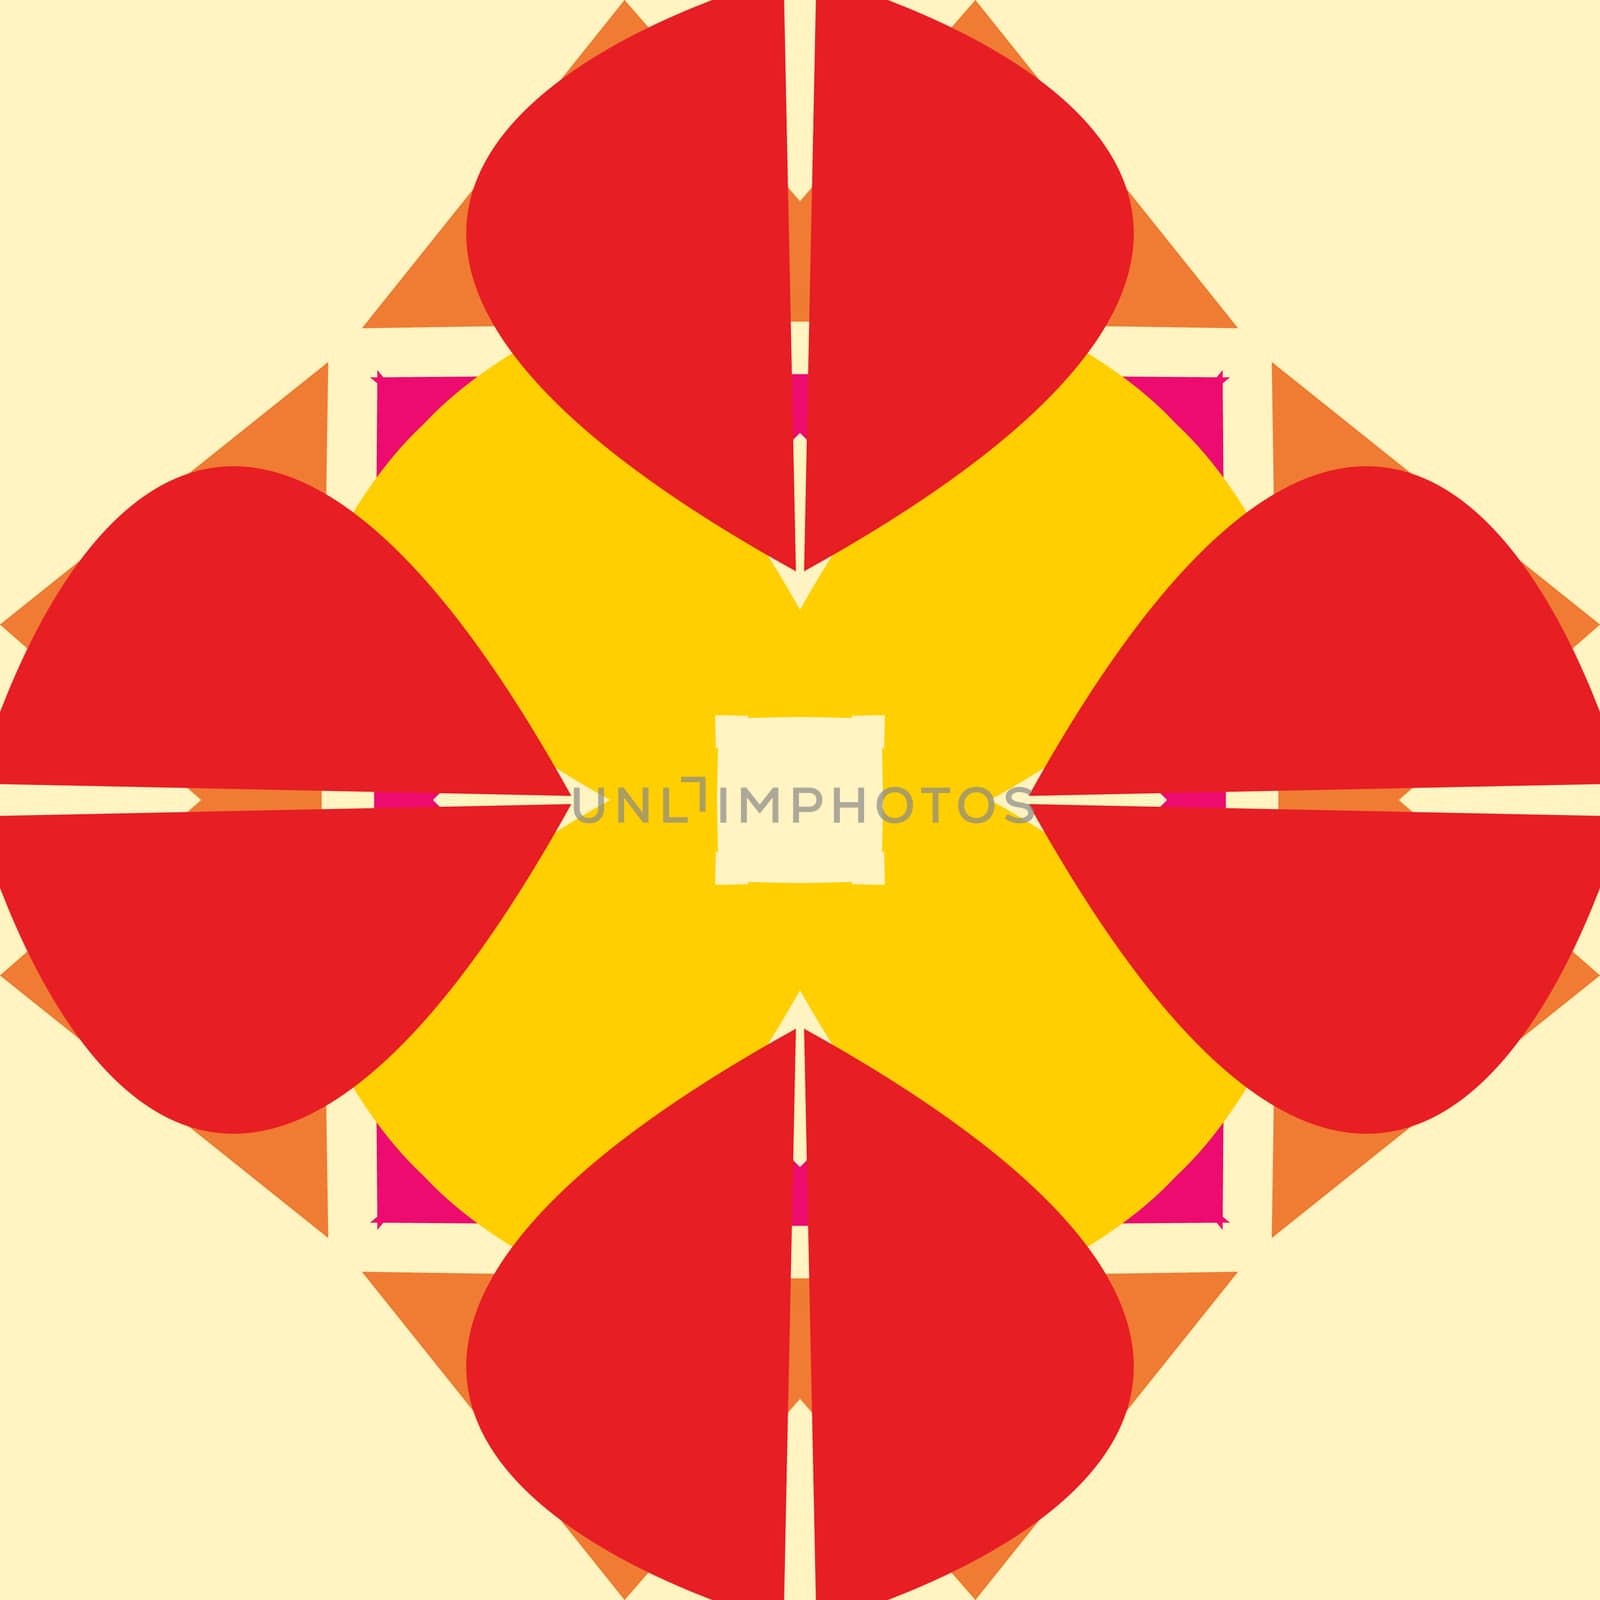 Symmetrical red and yellow tile shape background